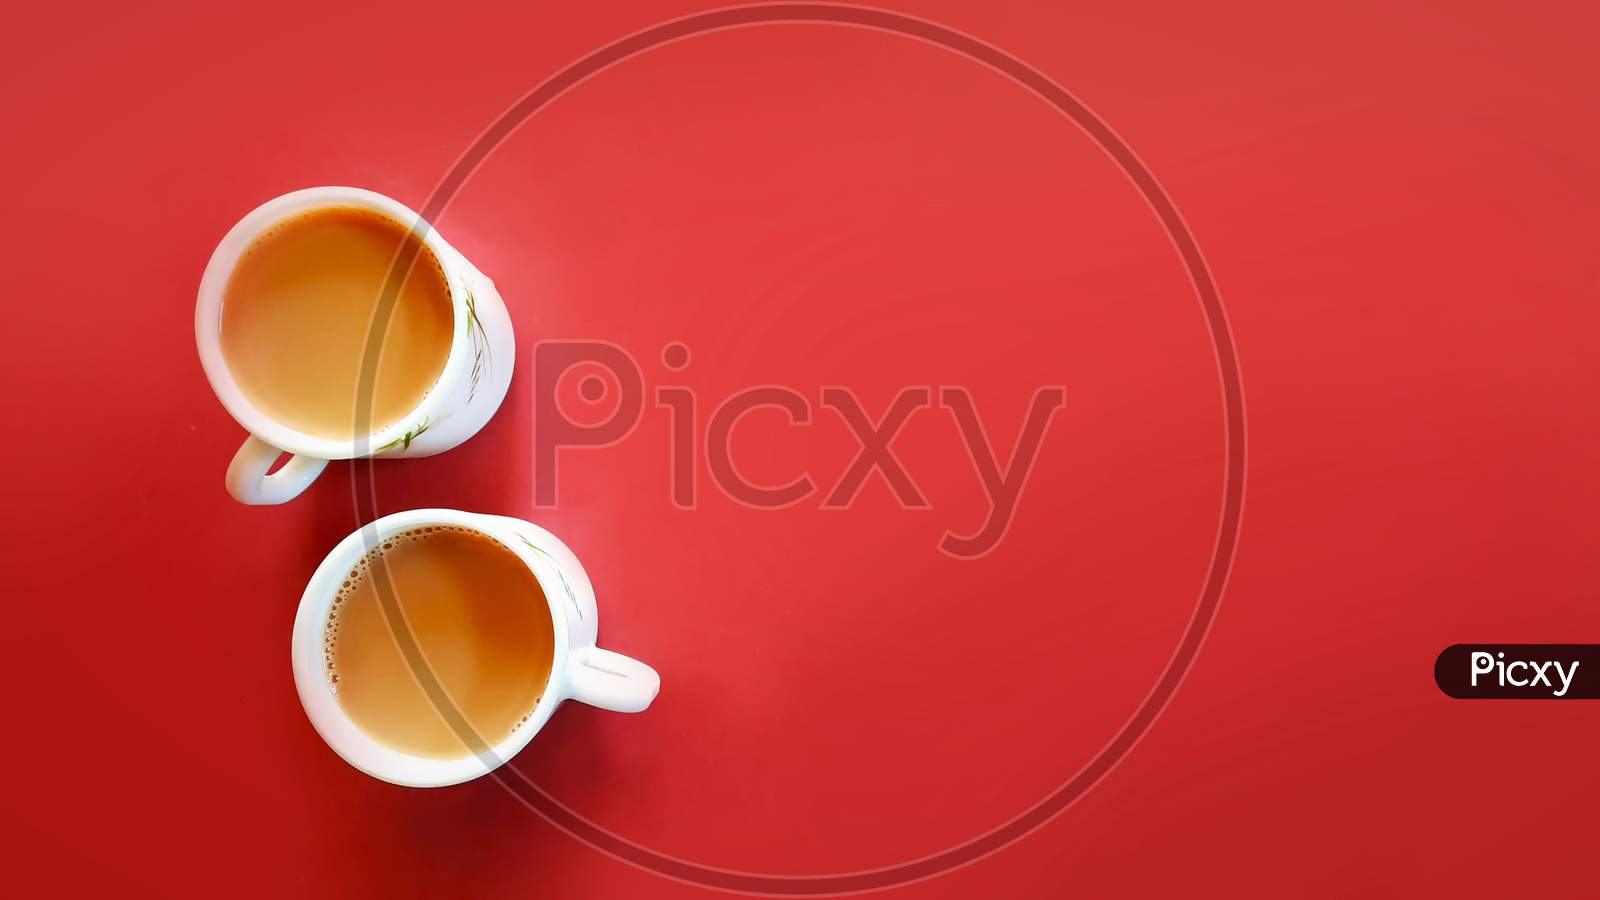 Indian Tea Or Chai In Ceramic Cups Isolated In Clean Background